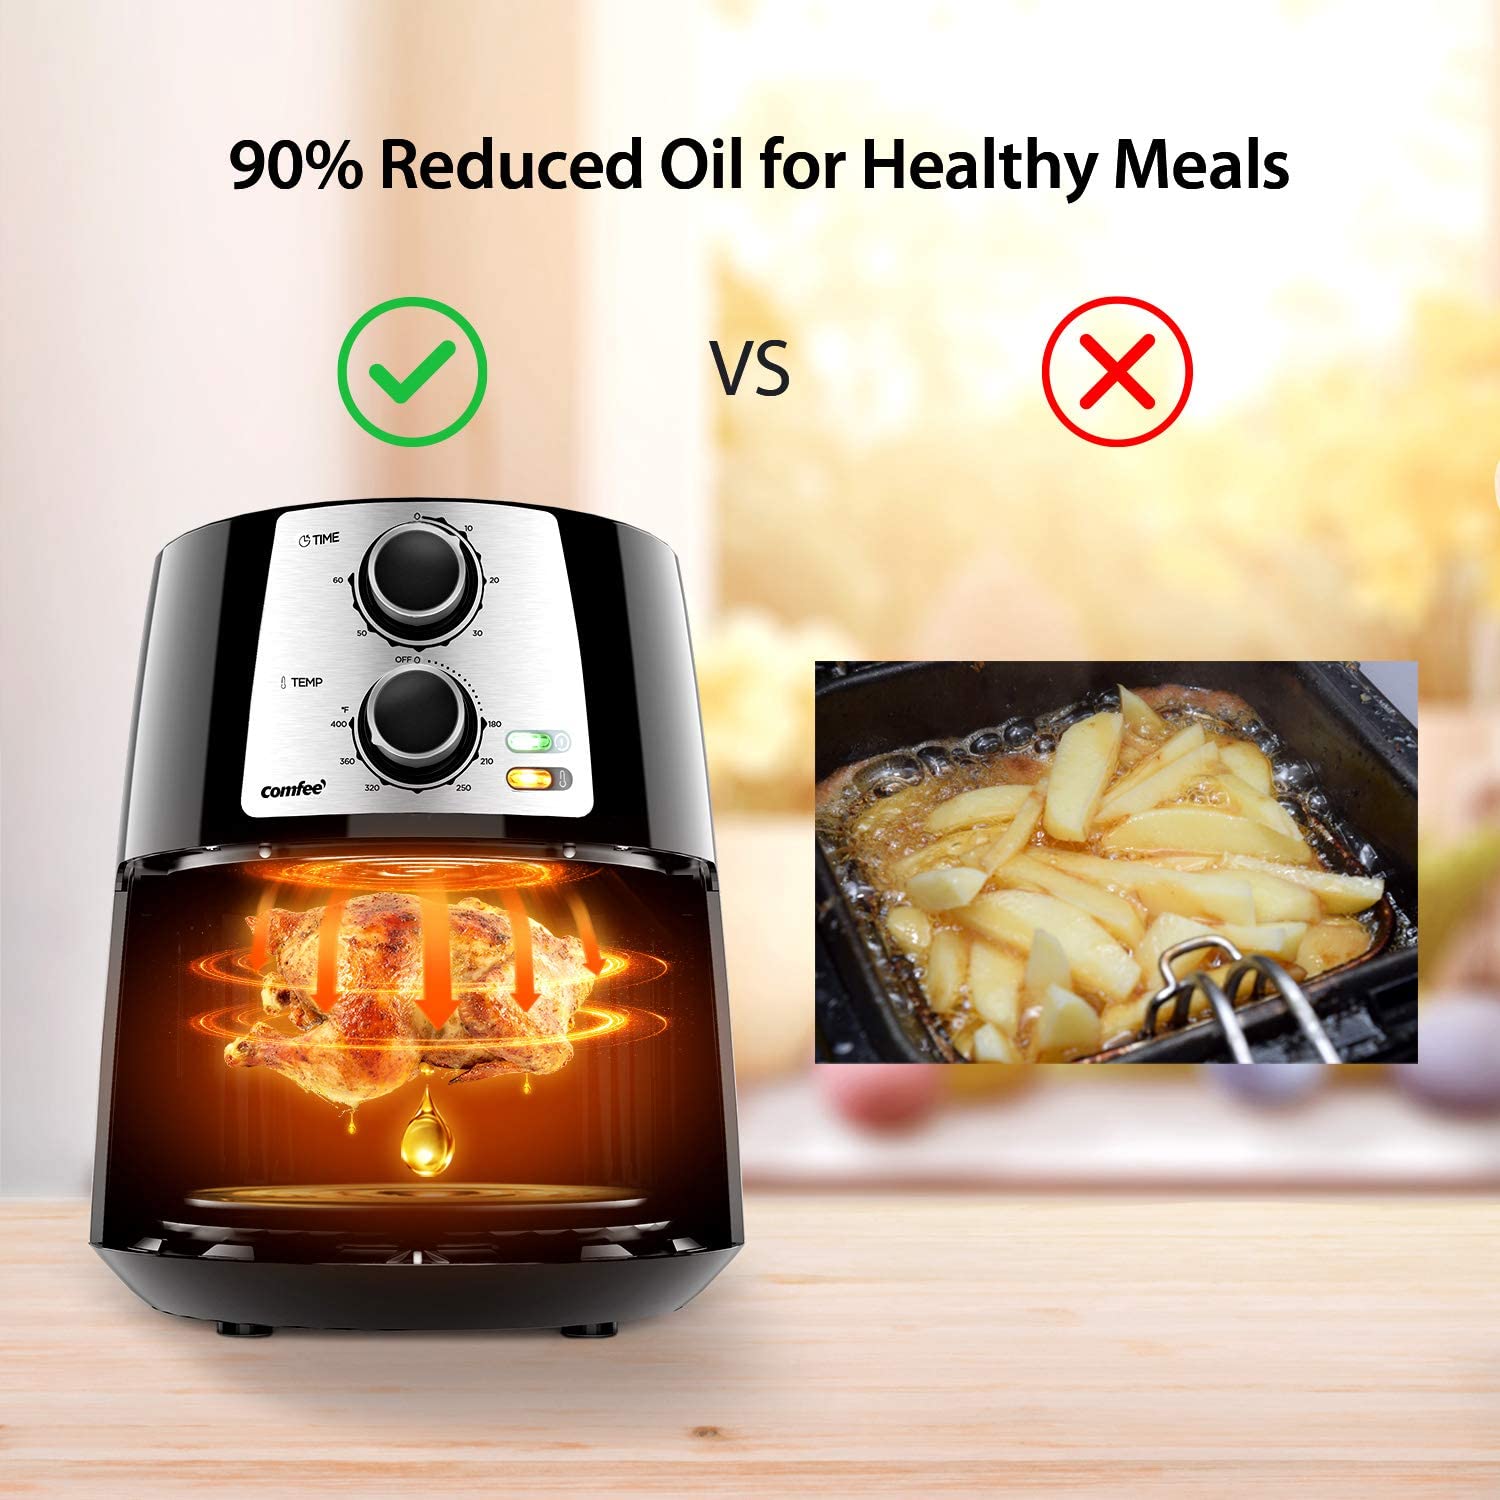 COMFEE' 3.7QT Electric Air Fryer Oven & Oilless Cooker with 8 Menus